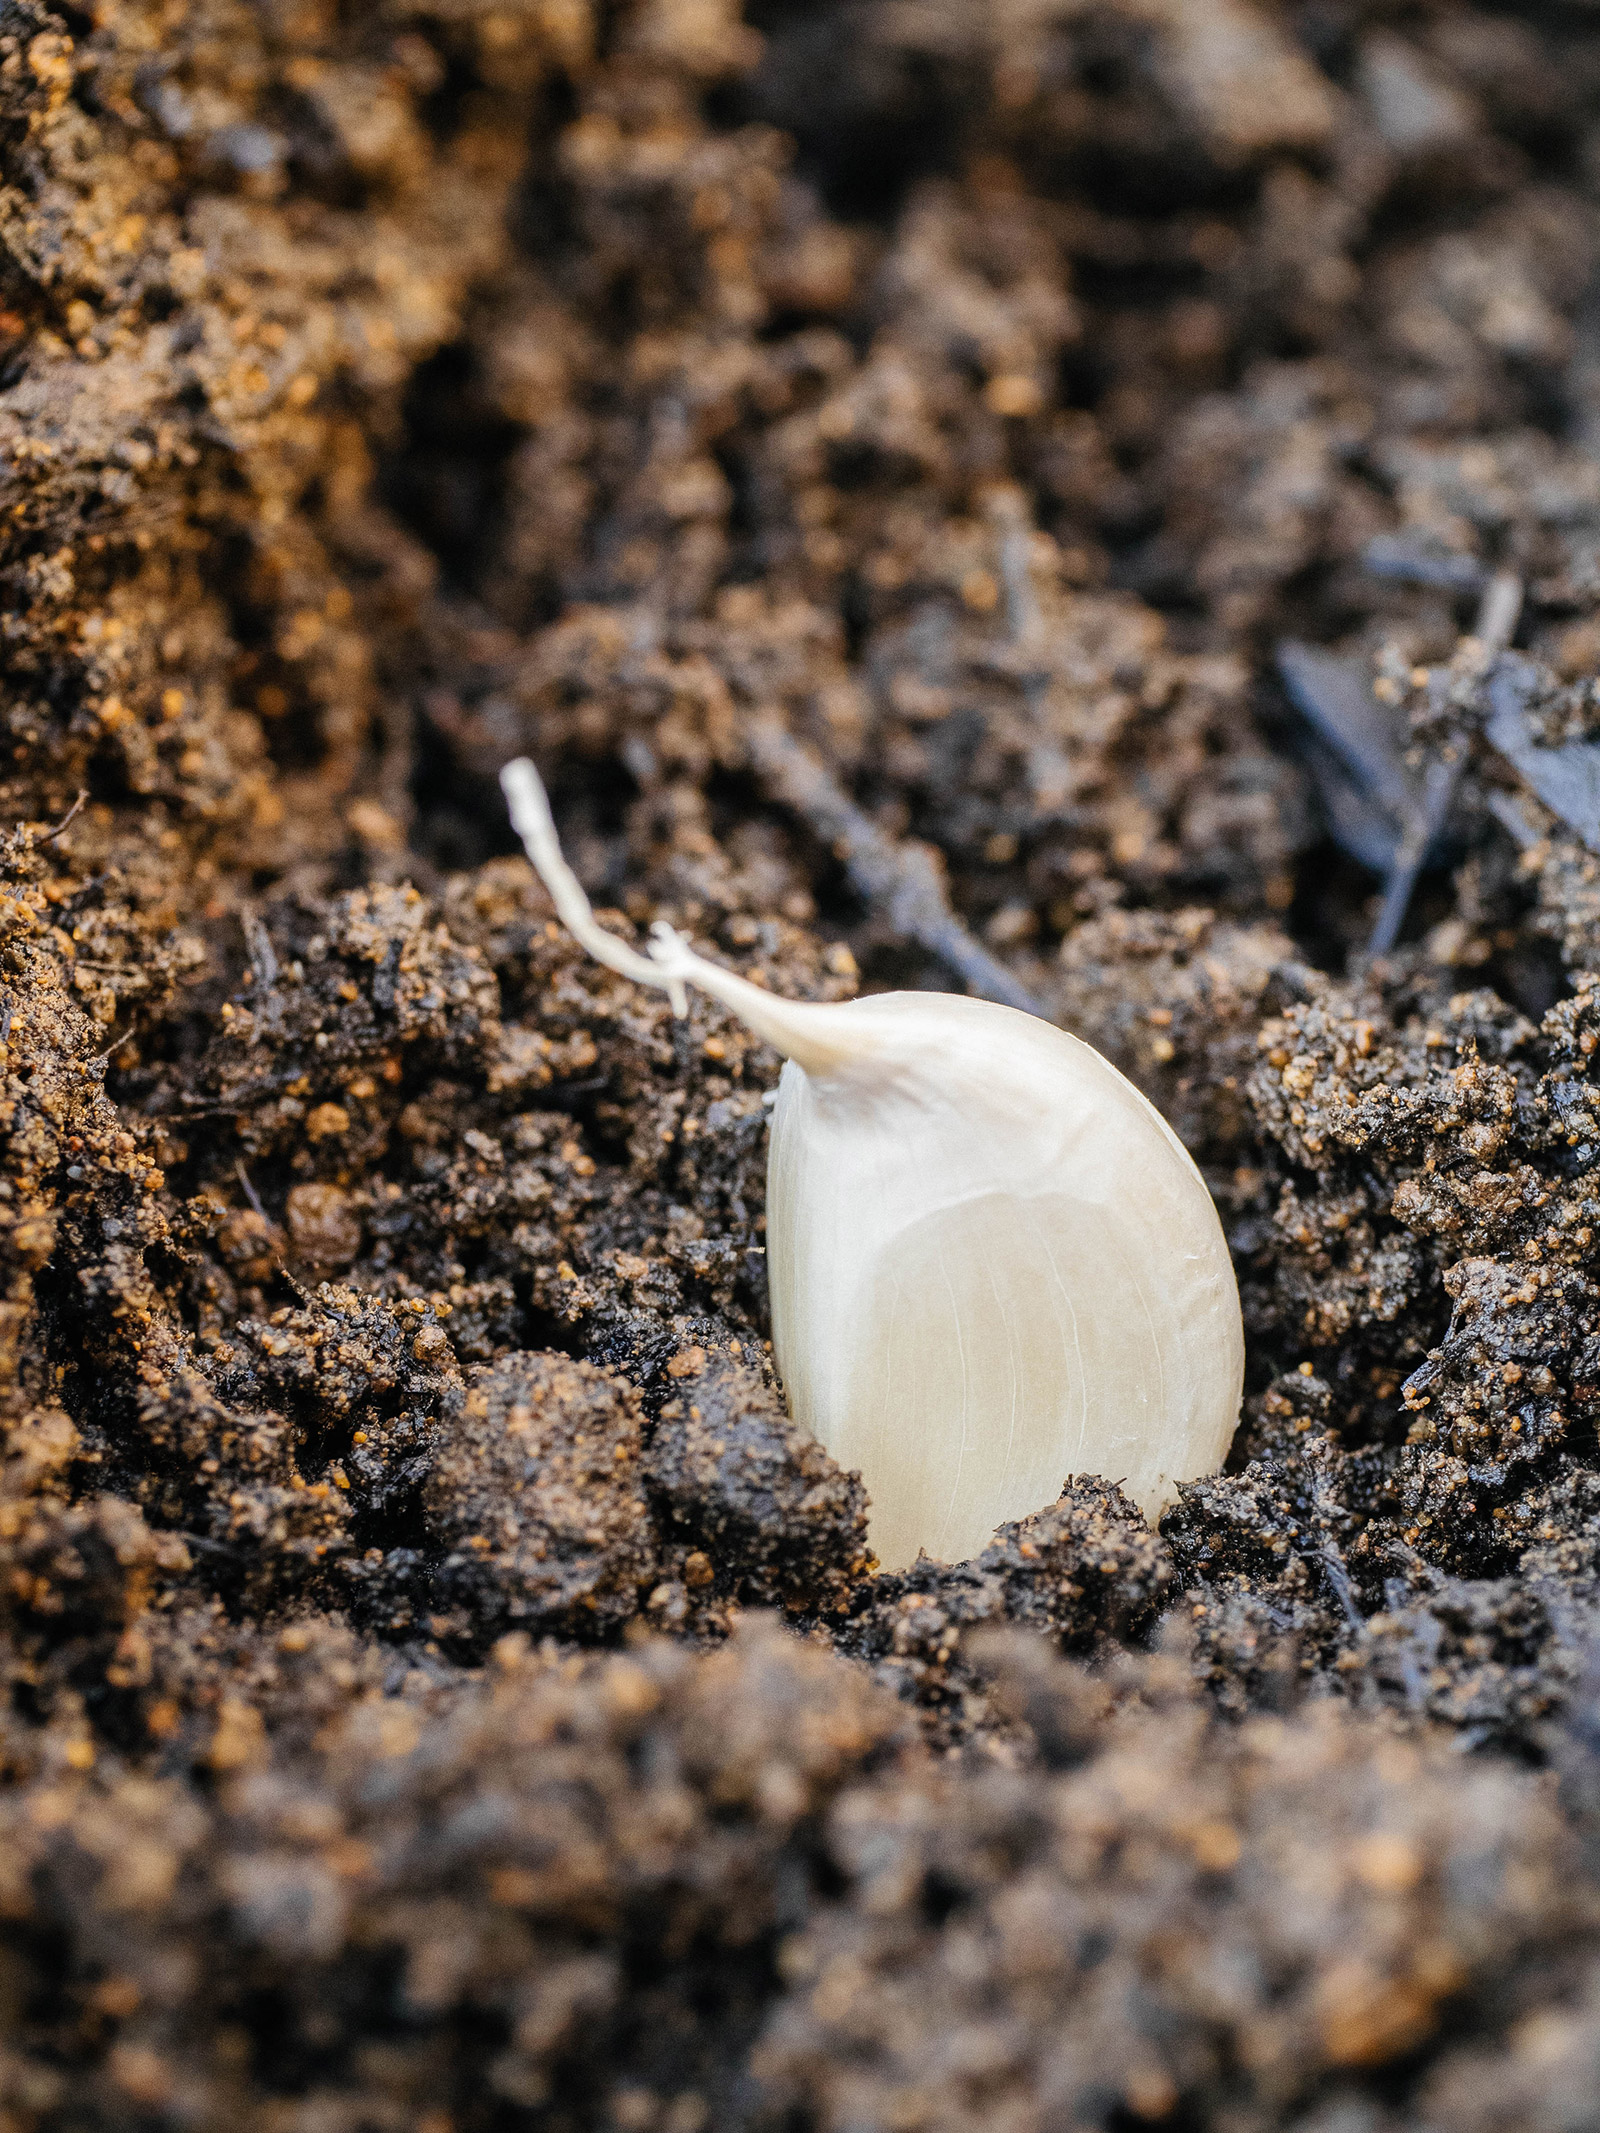 Close-up of garlic clove planted in soil